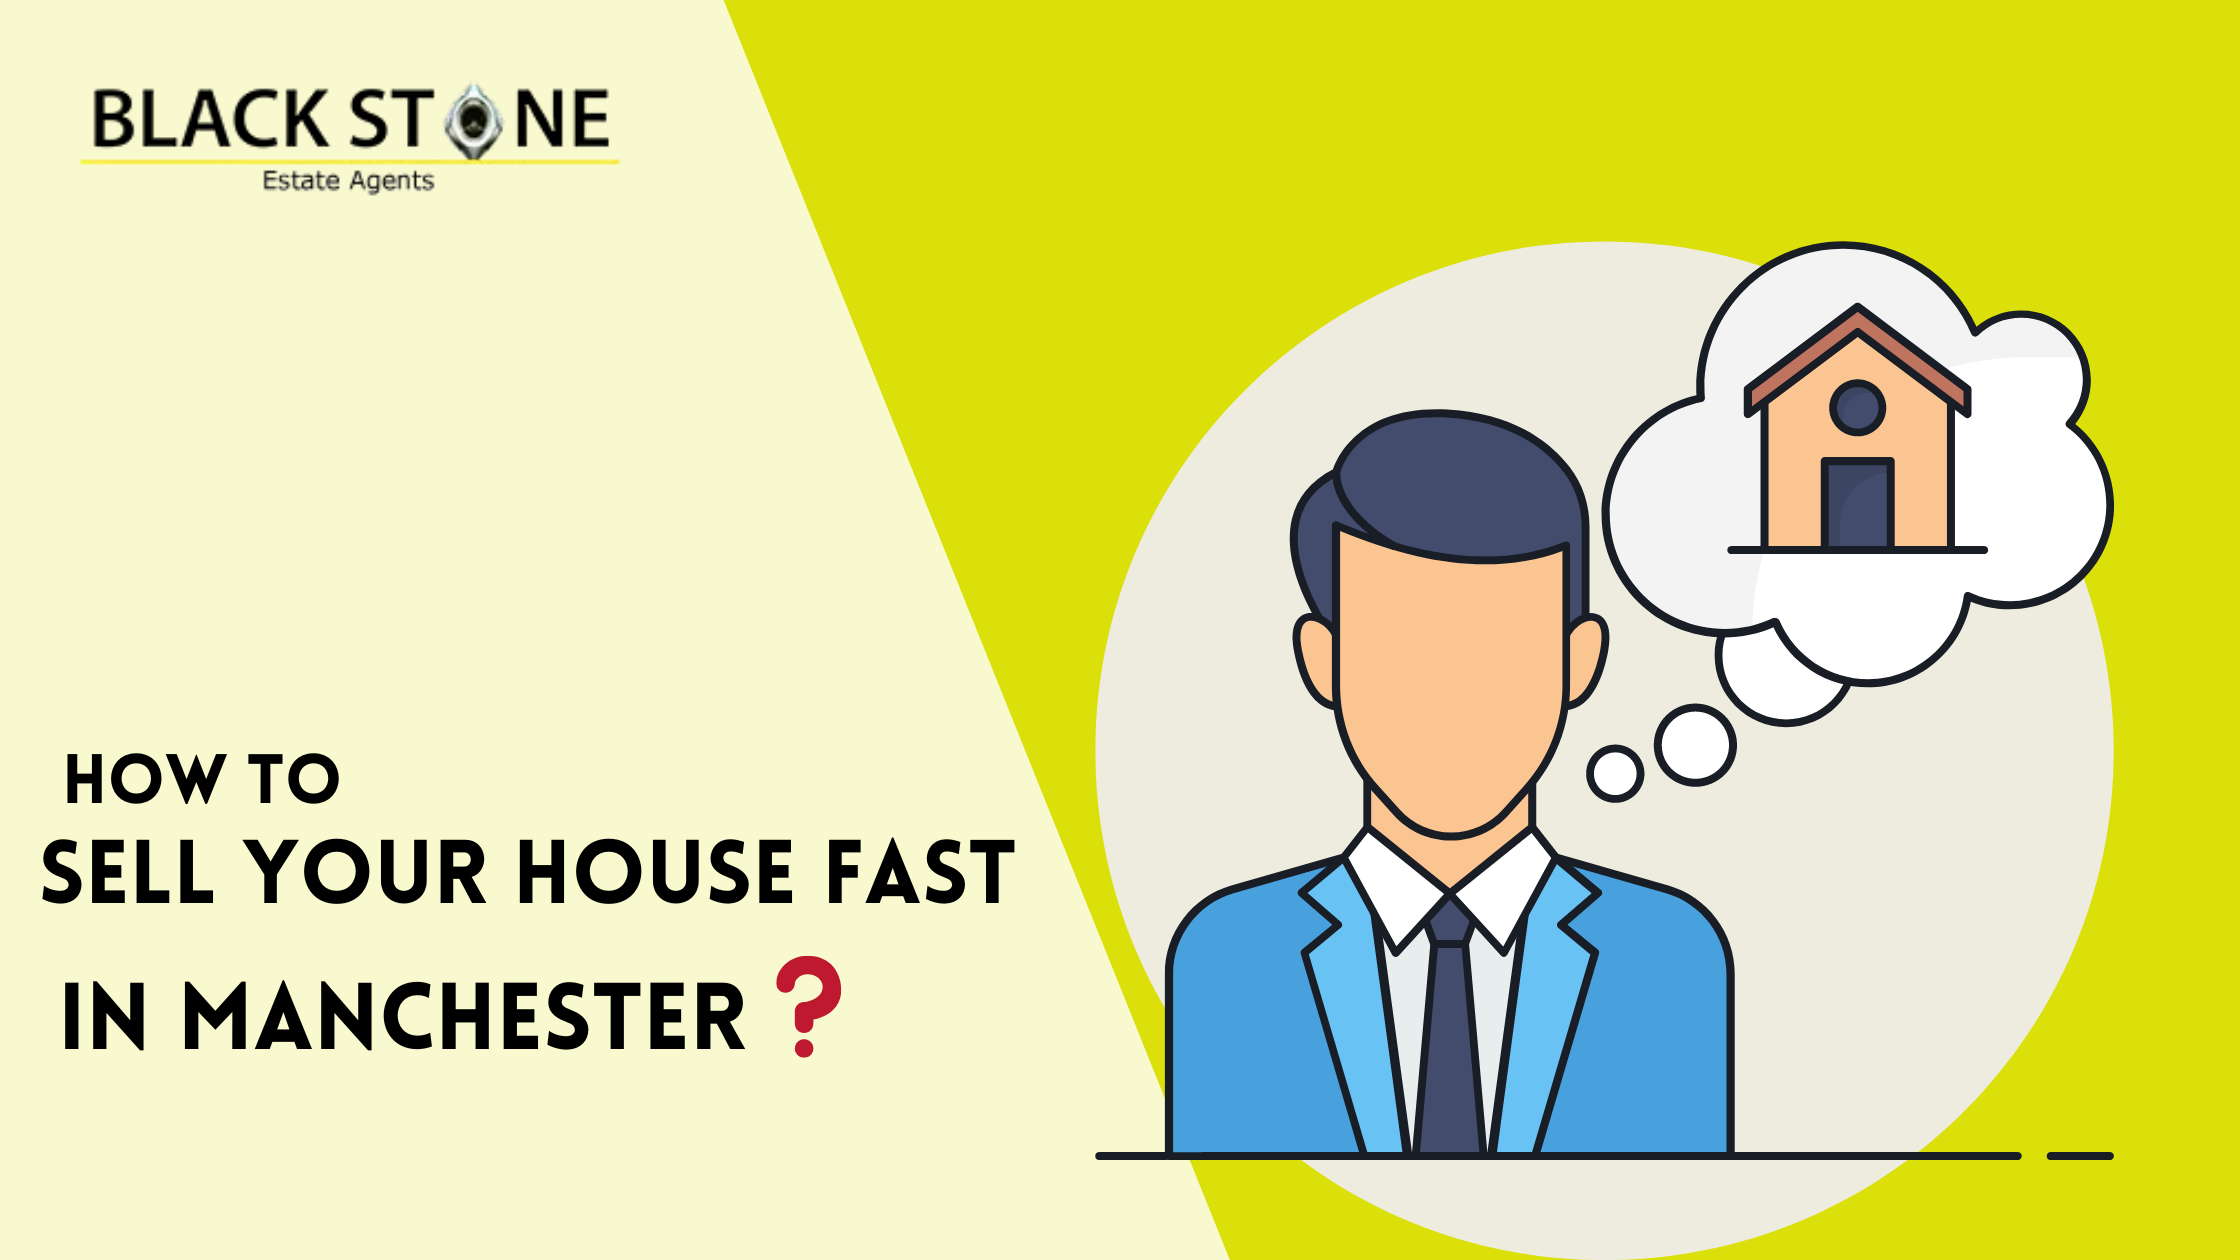 How To Sell Your House Fast In Manchester?